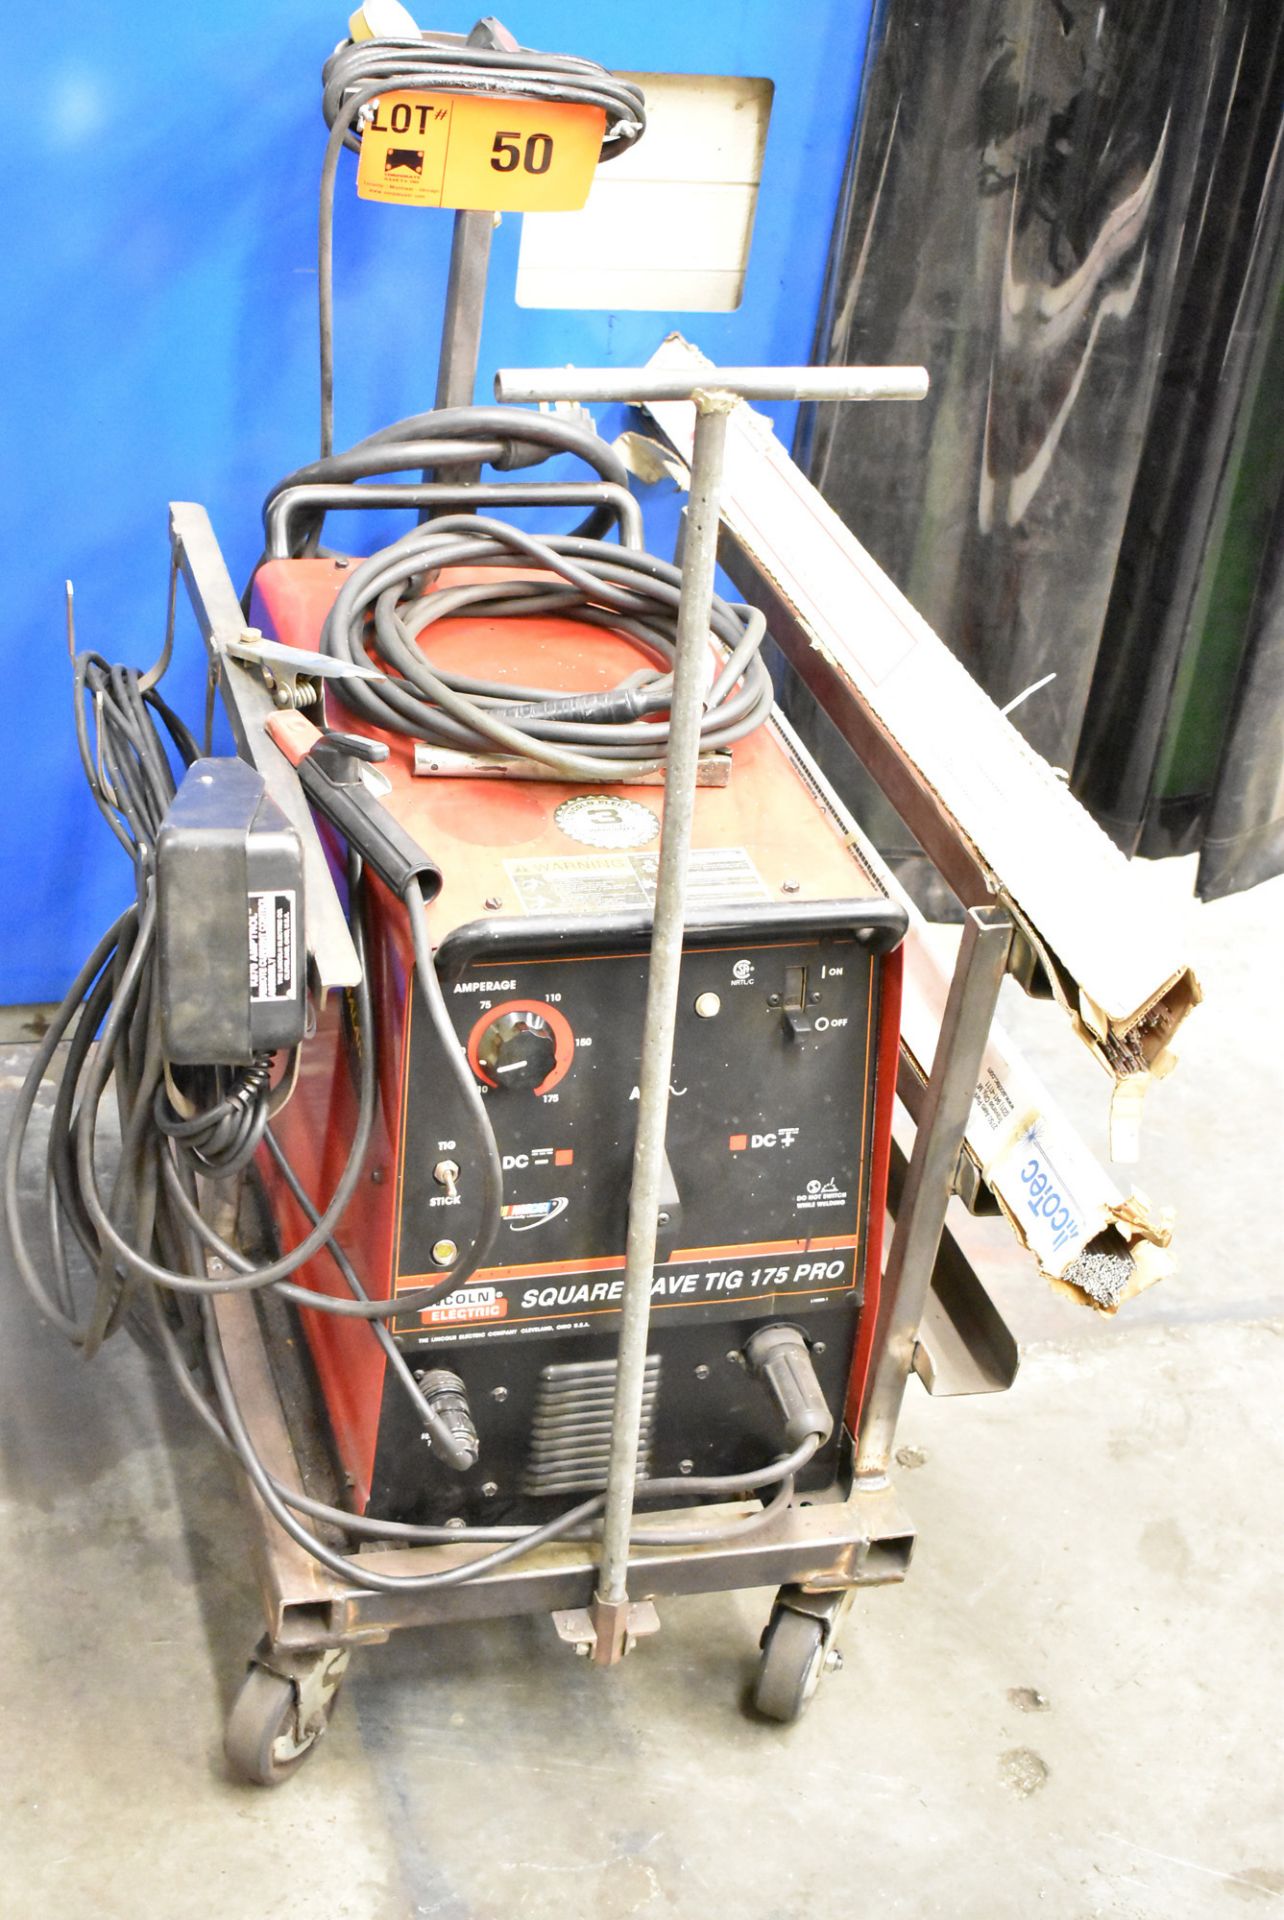 LOT/ LINCOLN SQUAREWAVE TIG 175 PRO TIG/ARC PORTABLE WELDER WITH CABLES AND GUN, S/N N/A